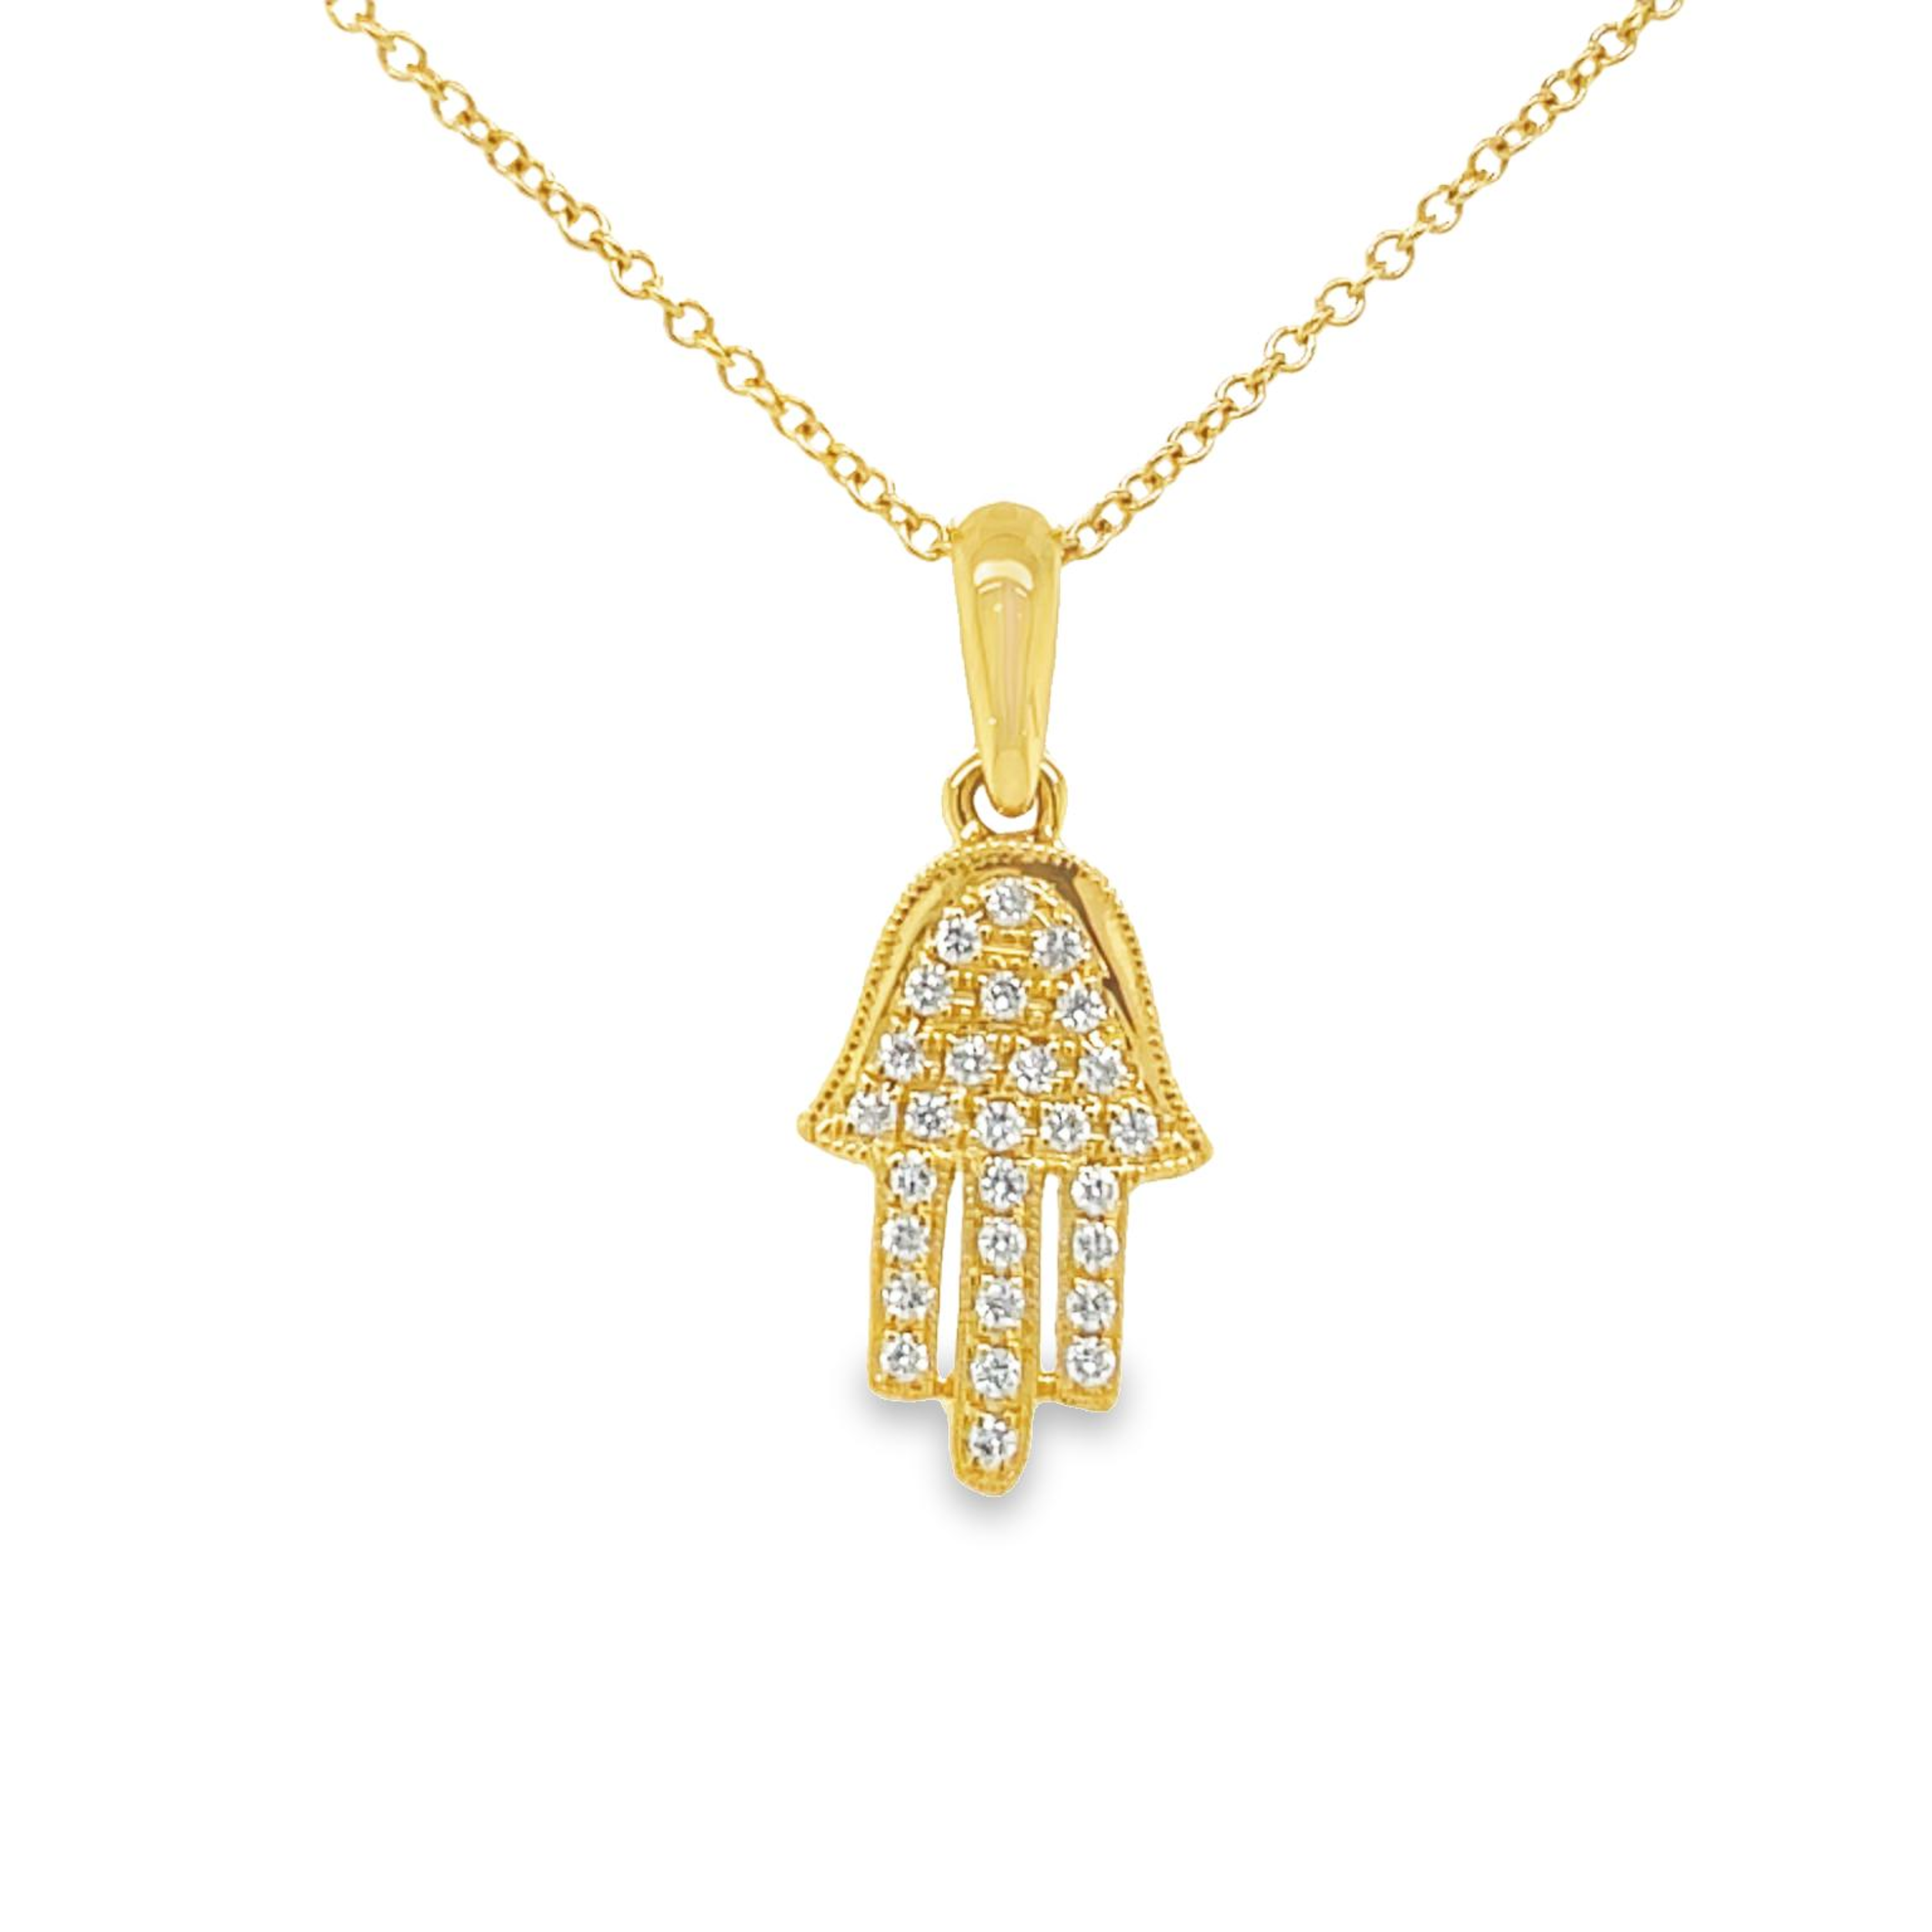 Dainty diamond necklace   Round diamonds 0.13 cts  18k Yellow Gold  18.00 mm long  16" gold chain $199 (optional)  Secure gold bail